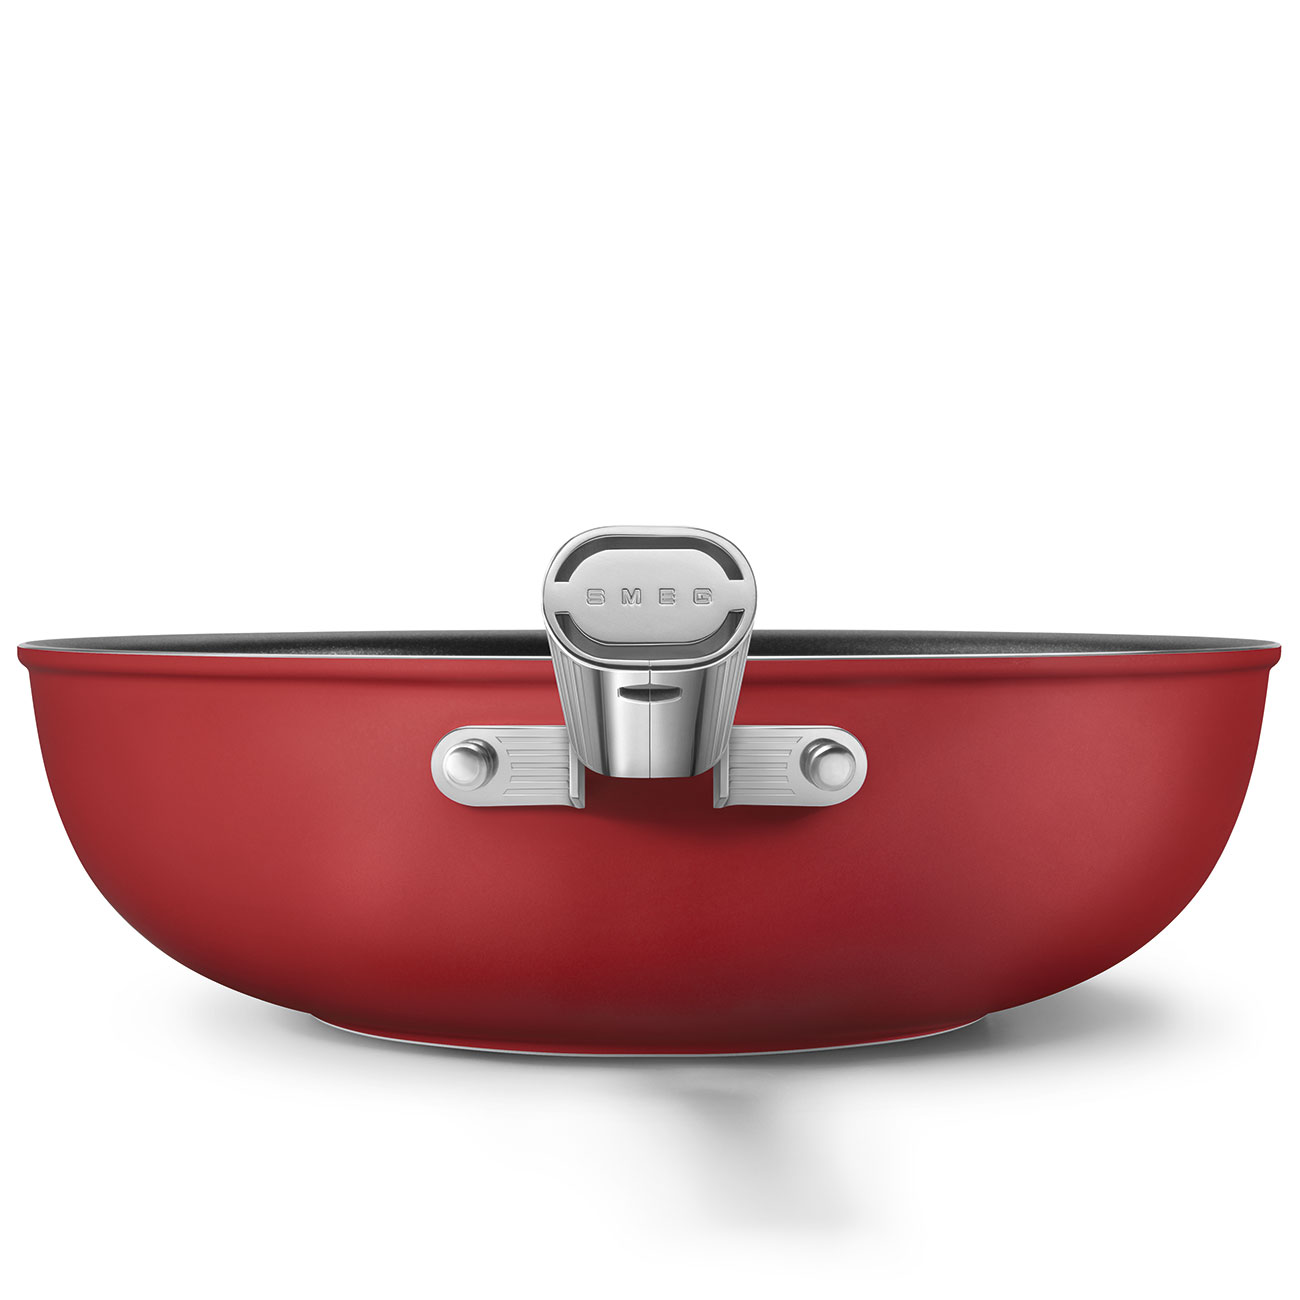 Smeg Red Non-stick Wok with Stainless Steel Handle - CKFW3001RDM_11